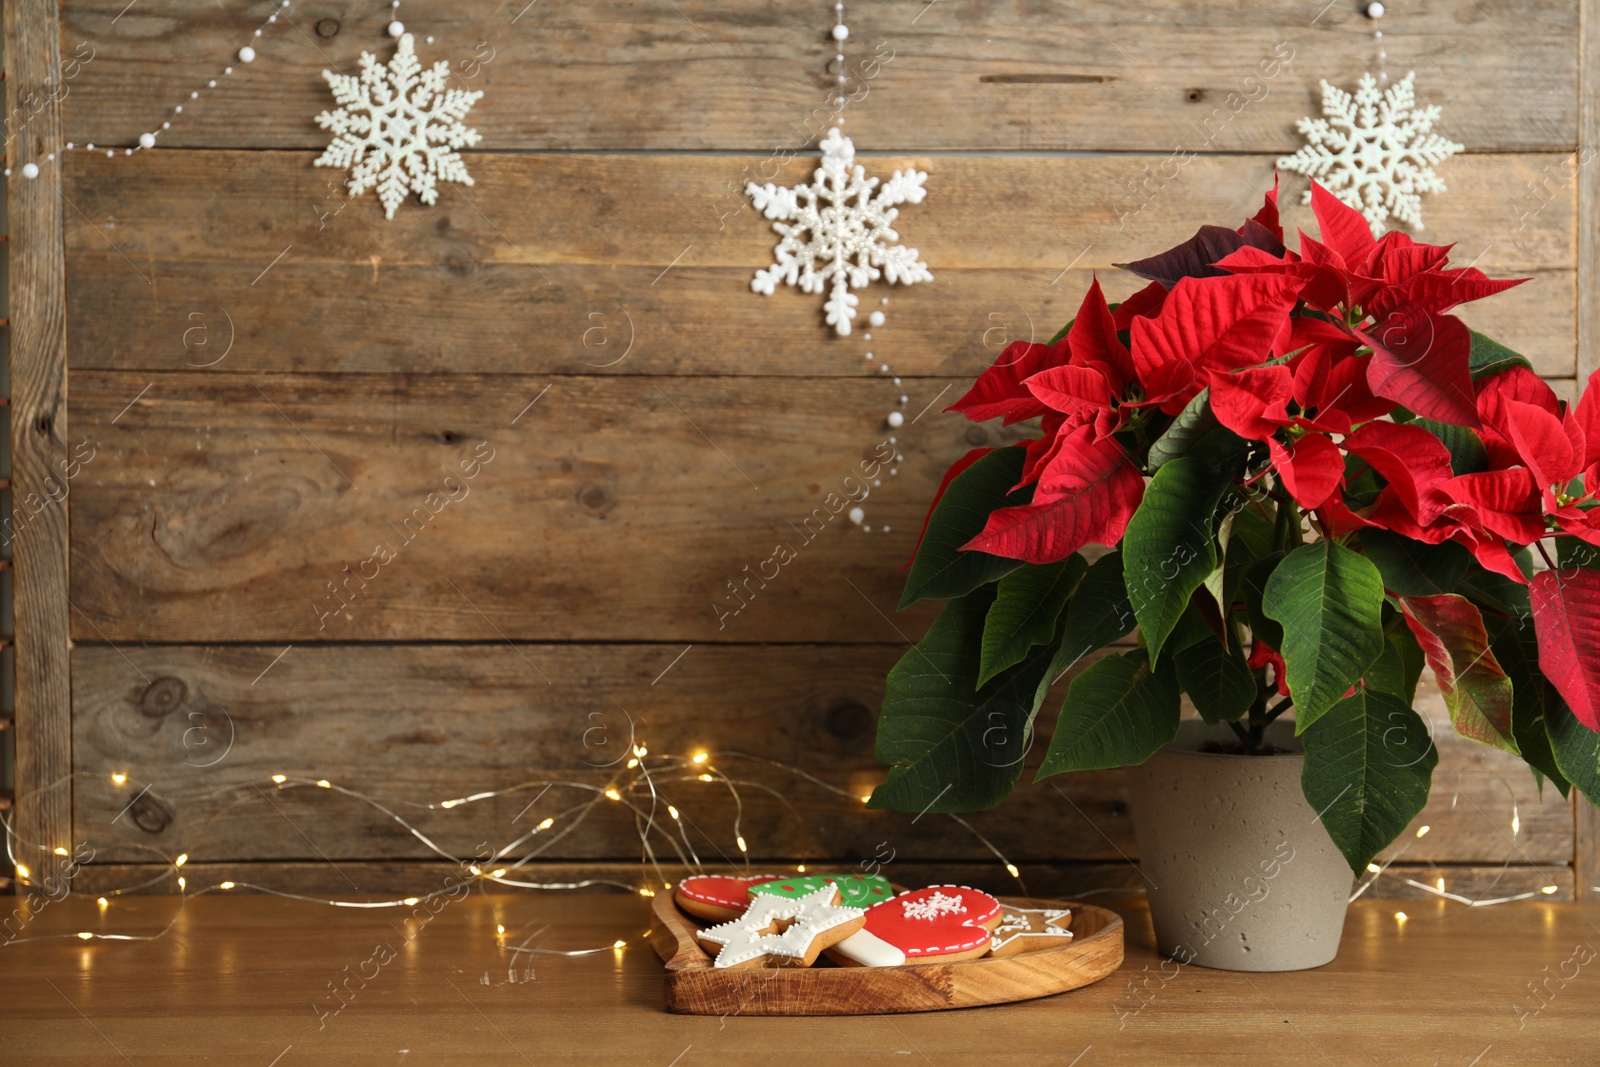 Photo of Poinsettia (traditional Christmas flower), cookies and string lights on wooden table. Space for text